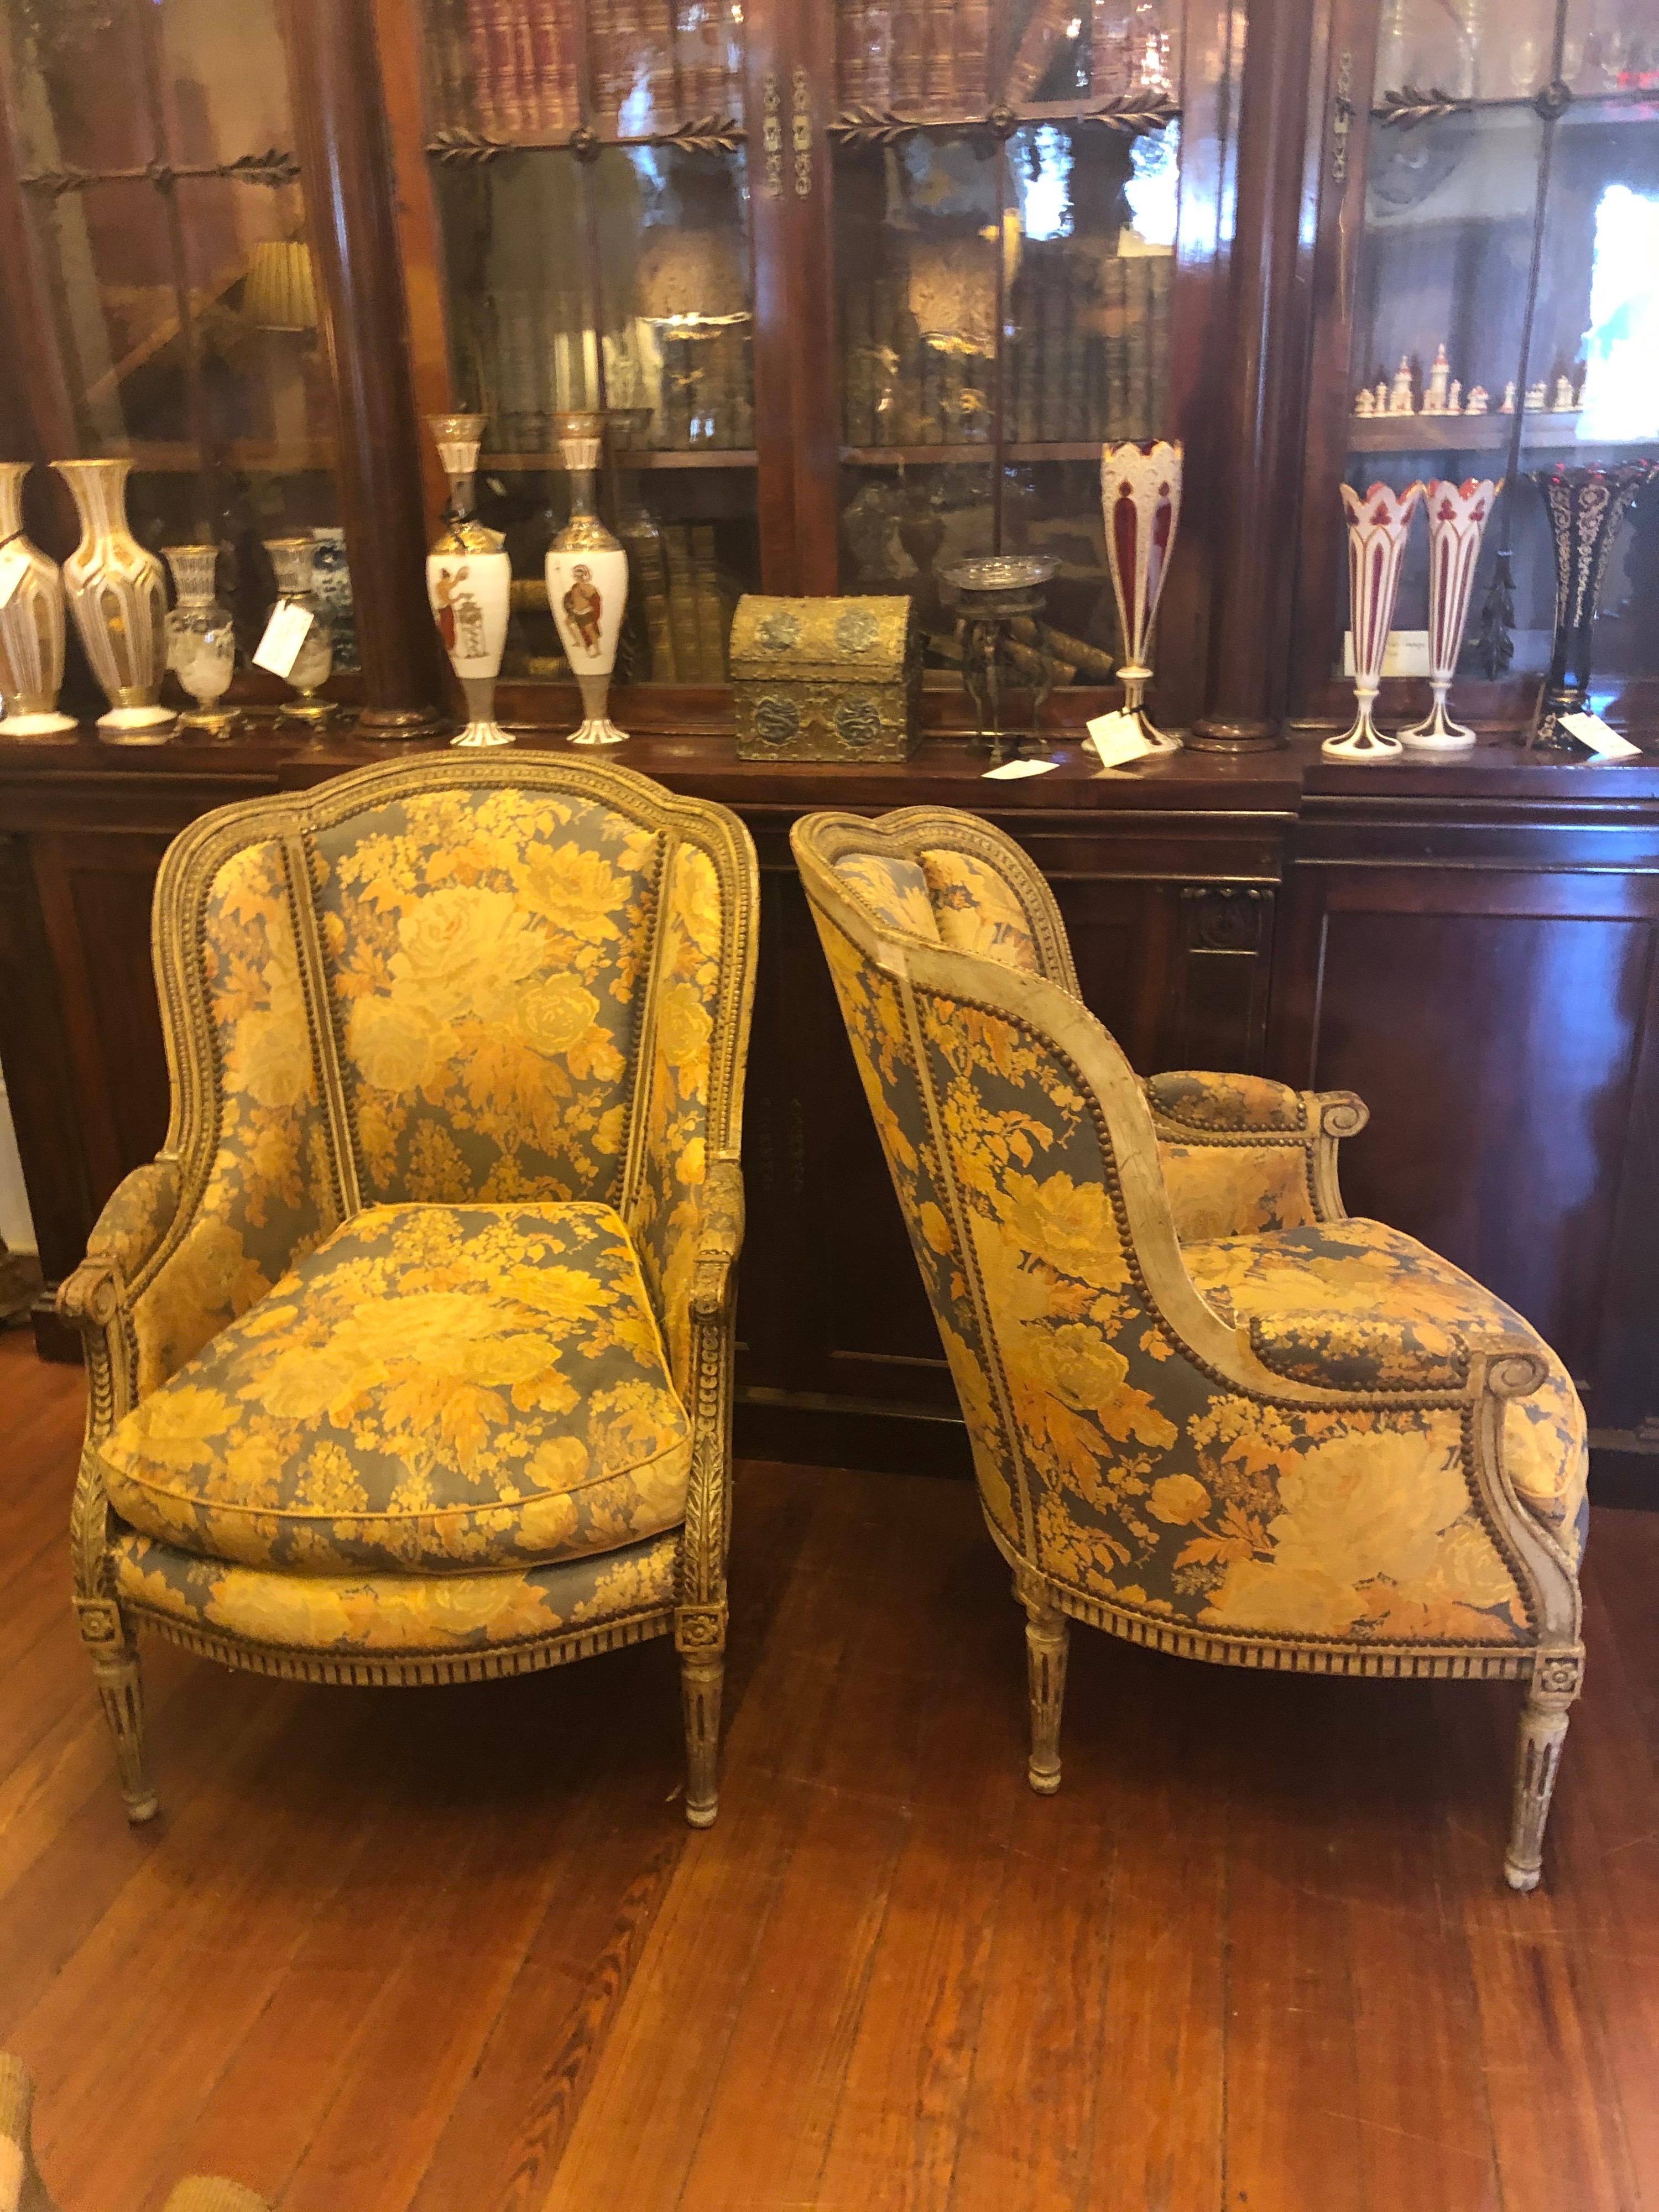 Pair of French Louis XVI wing chairs with incredible carving and pegged joints, early 19th century. Great large scale. Comfortable!